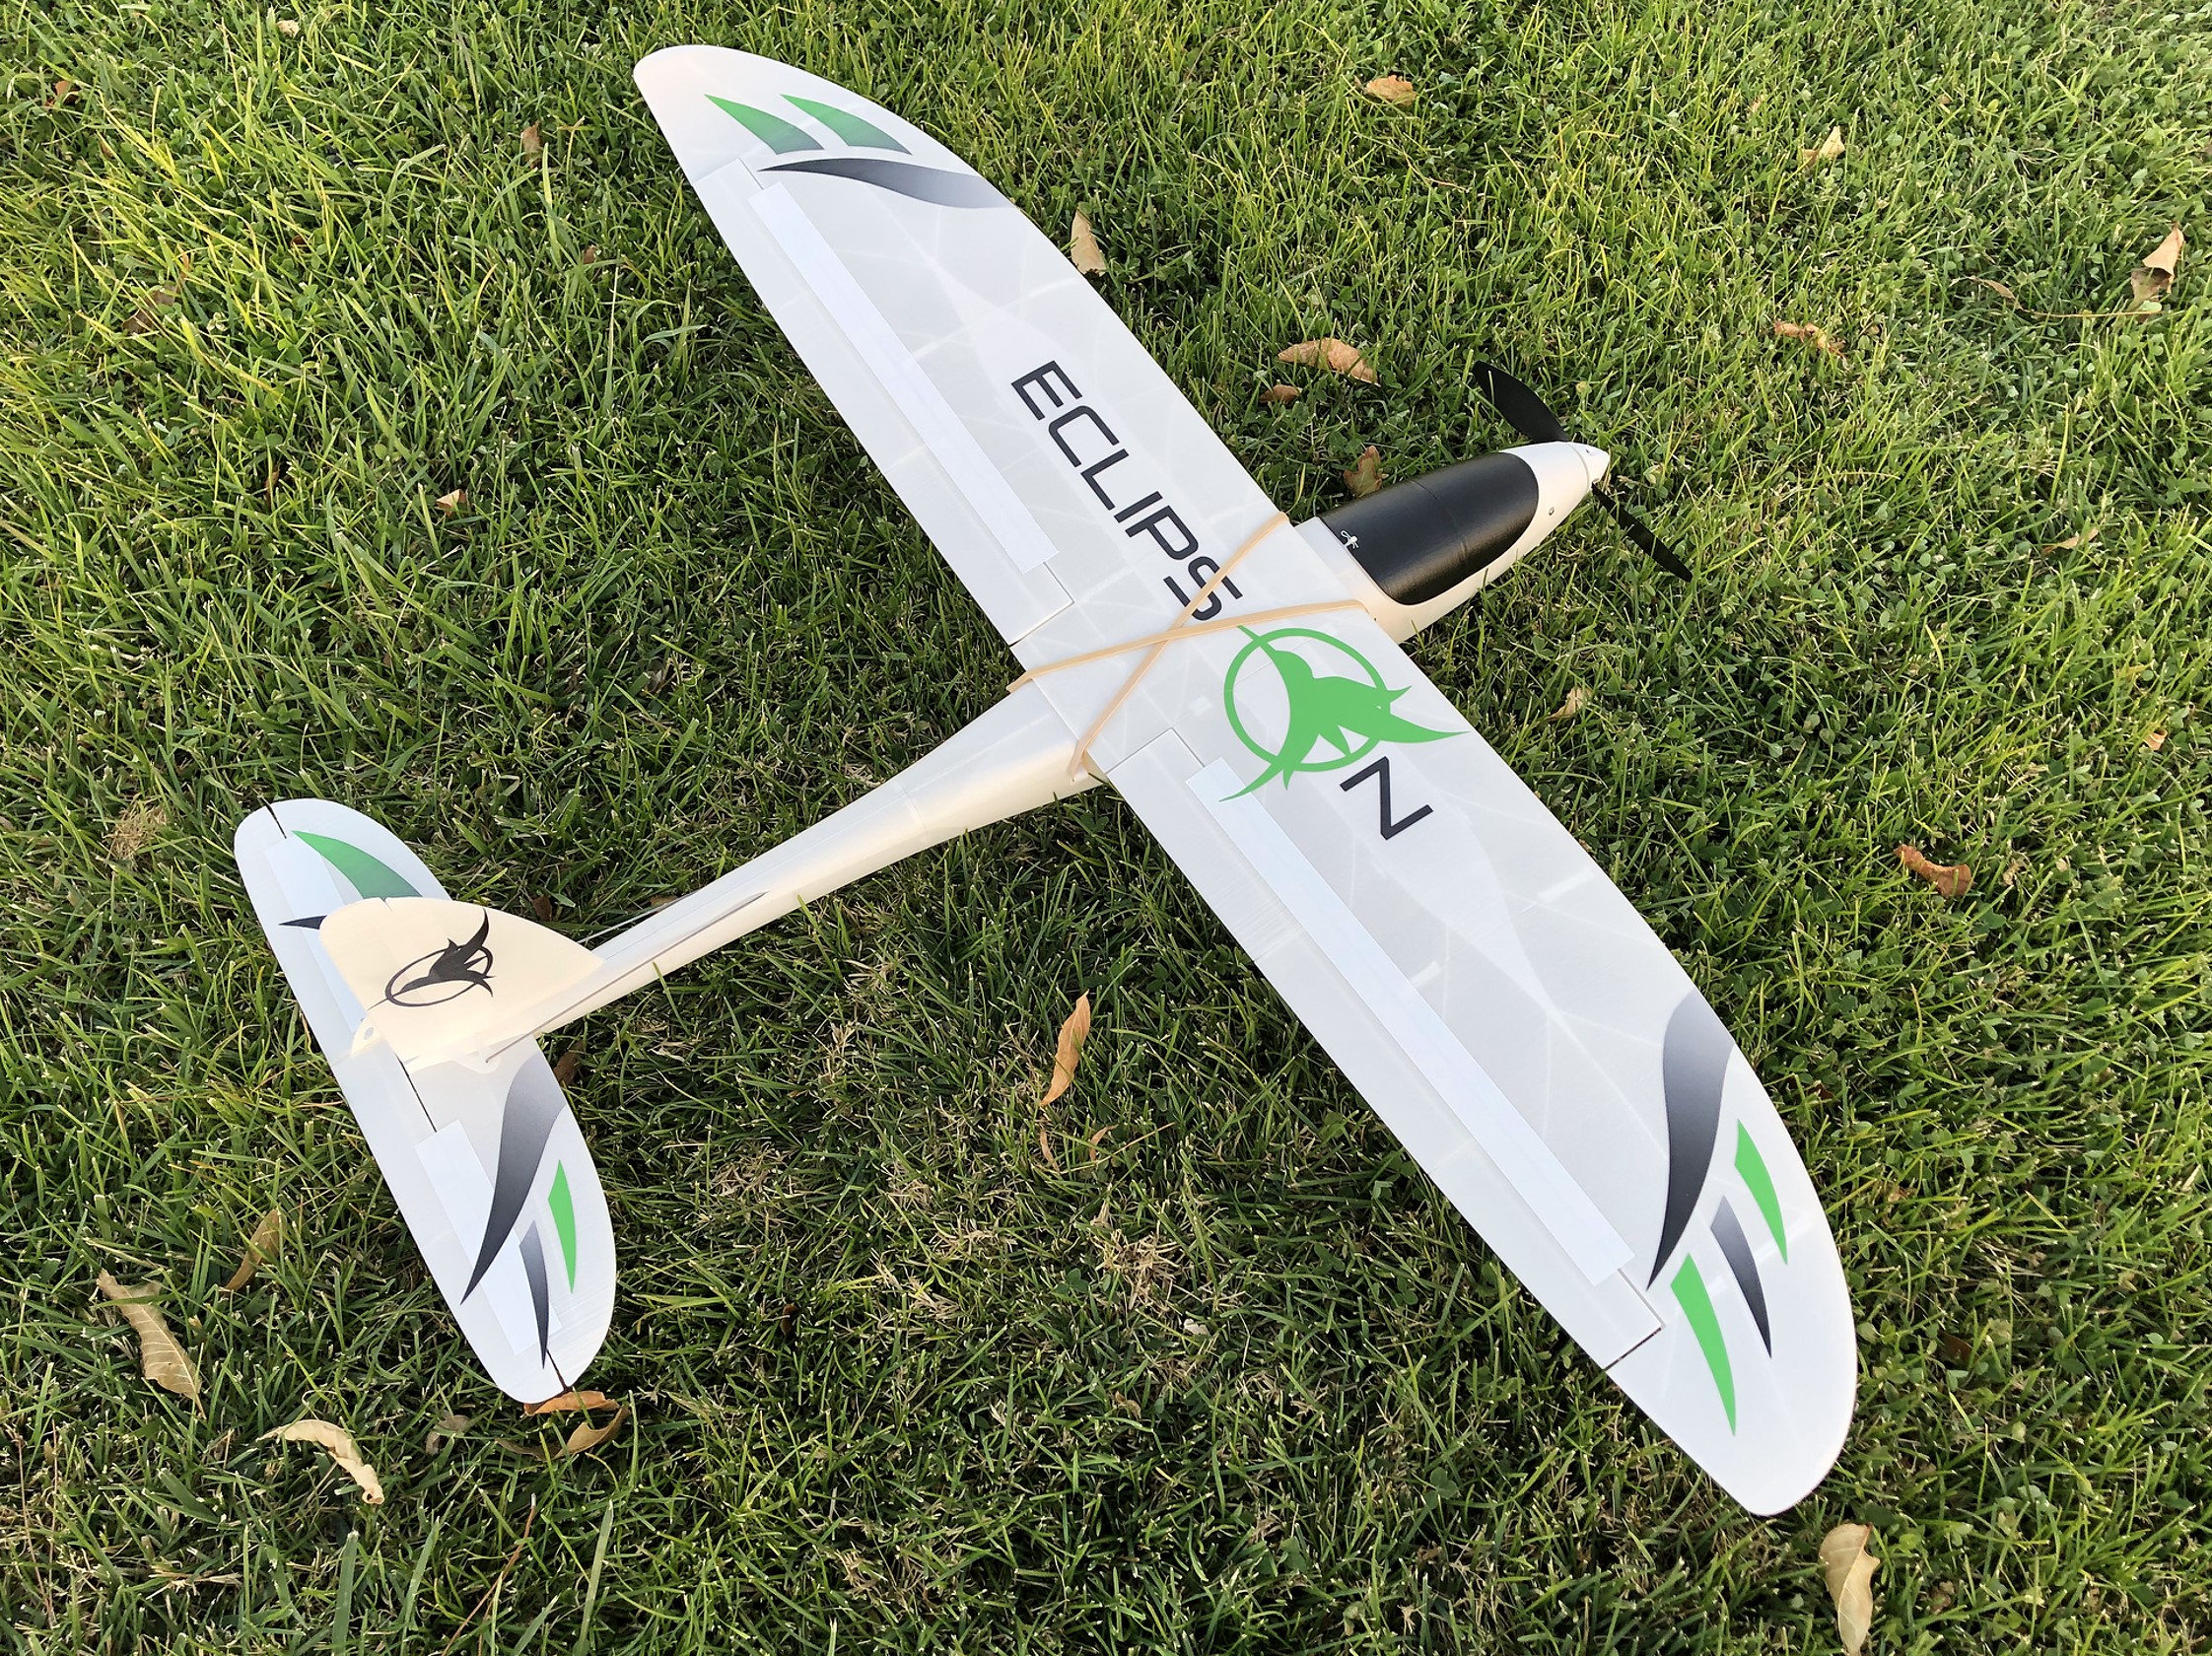 Model A Eclipson Airplanes